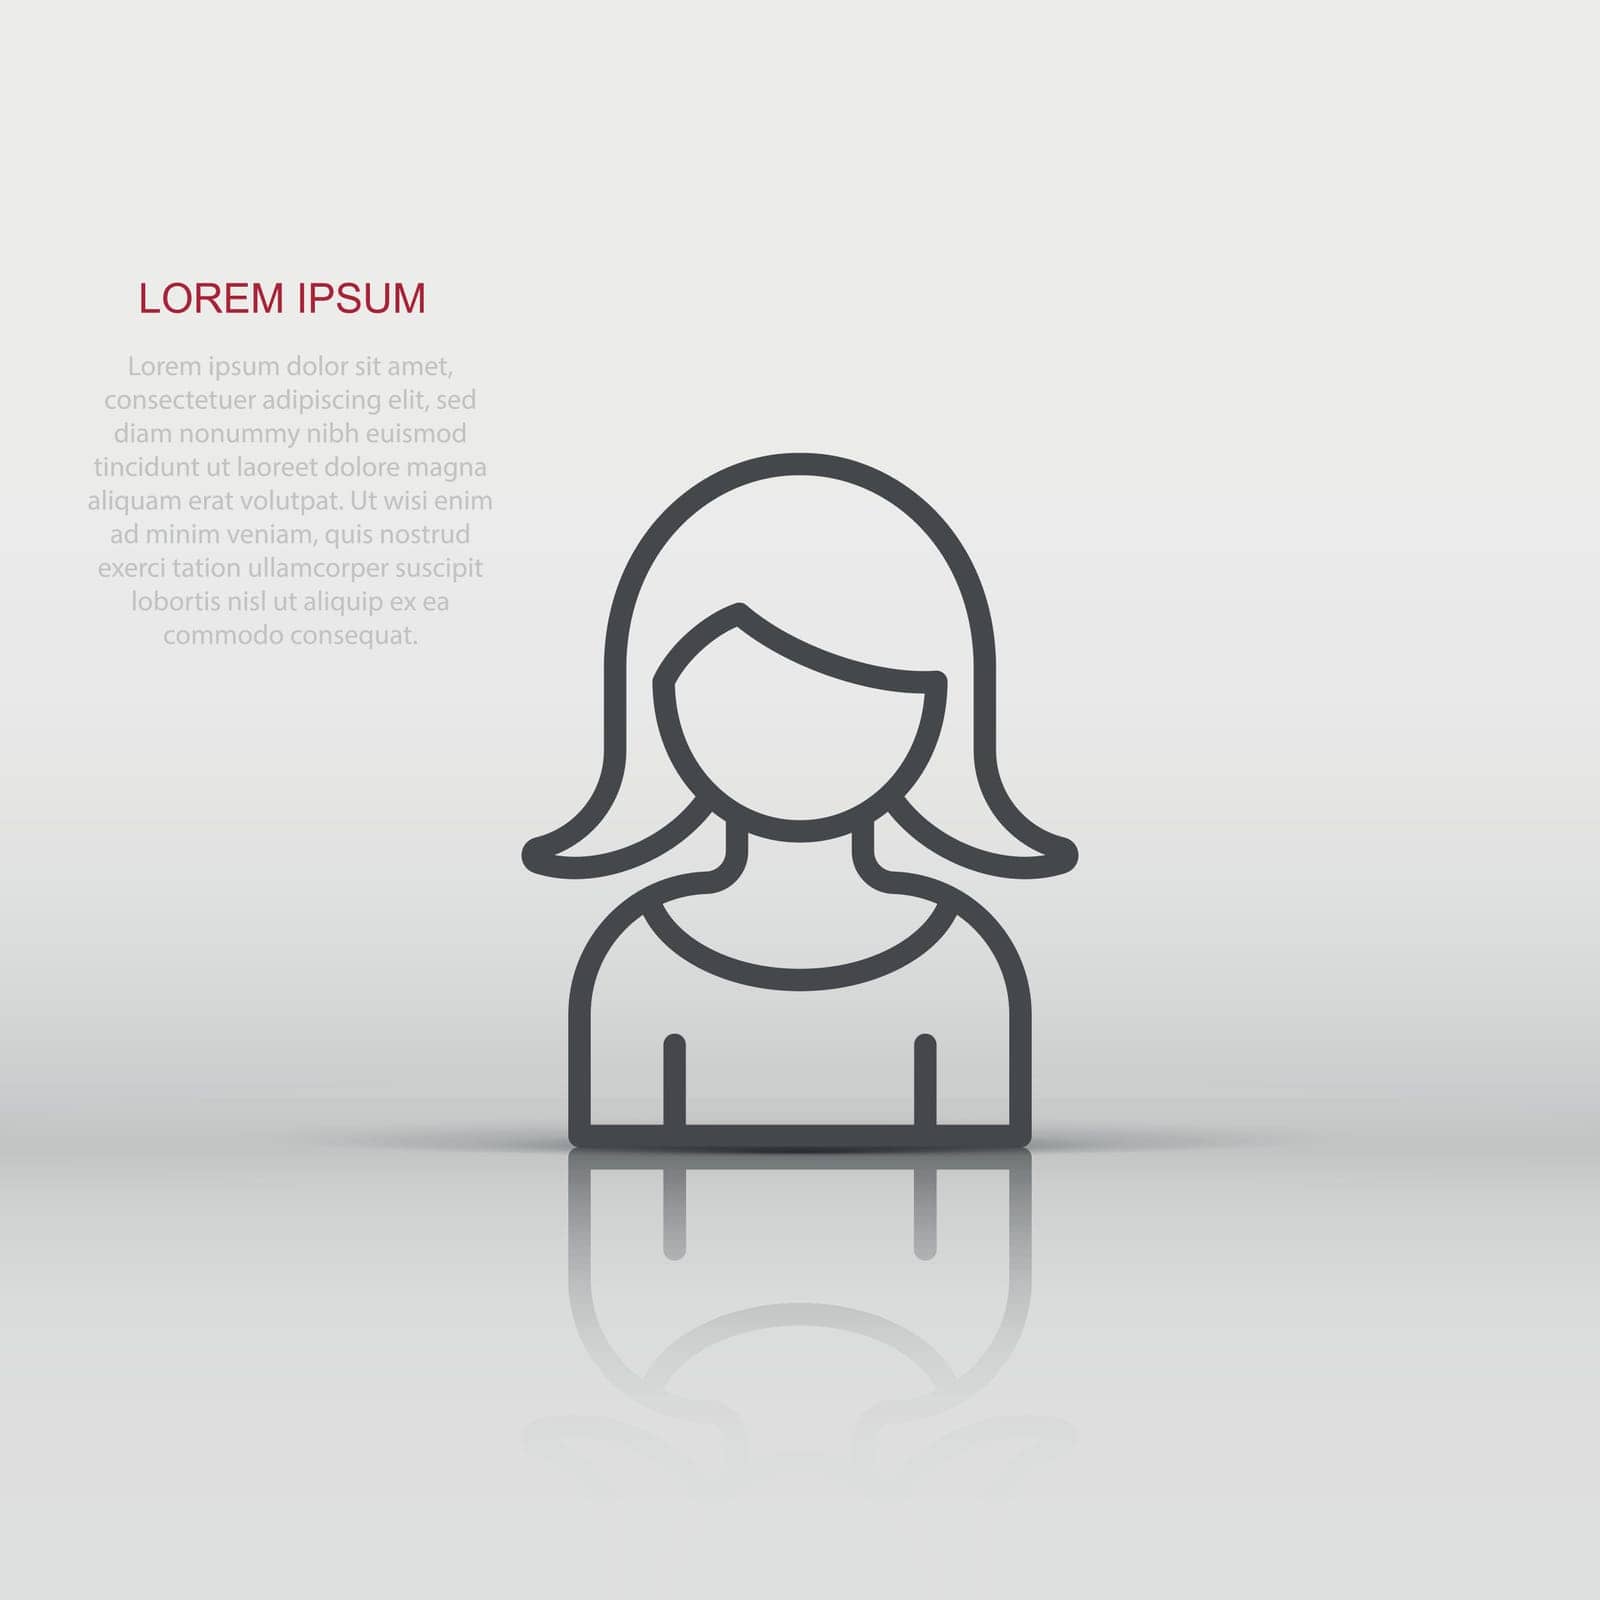 Woman face icon in flat style. People vector illustration on white background. Partnership business concept.